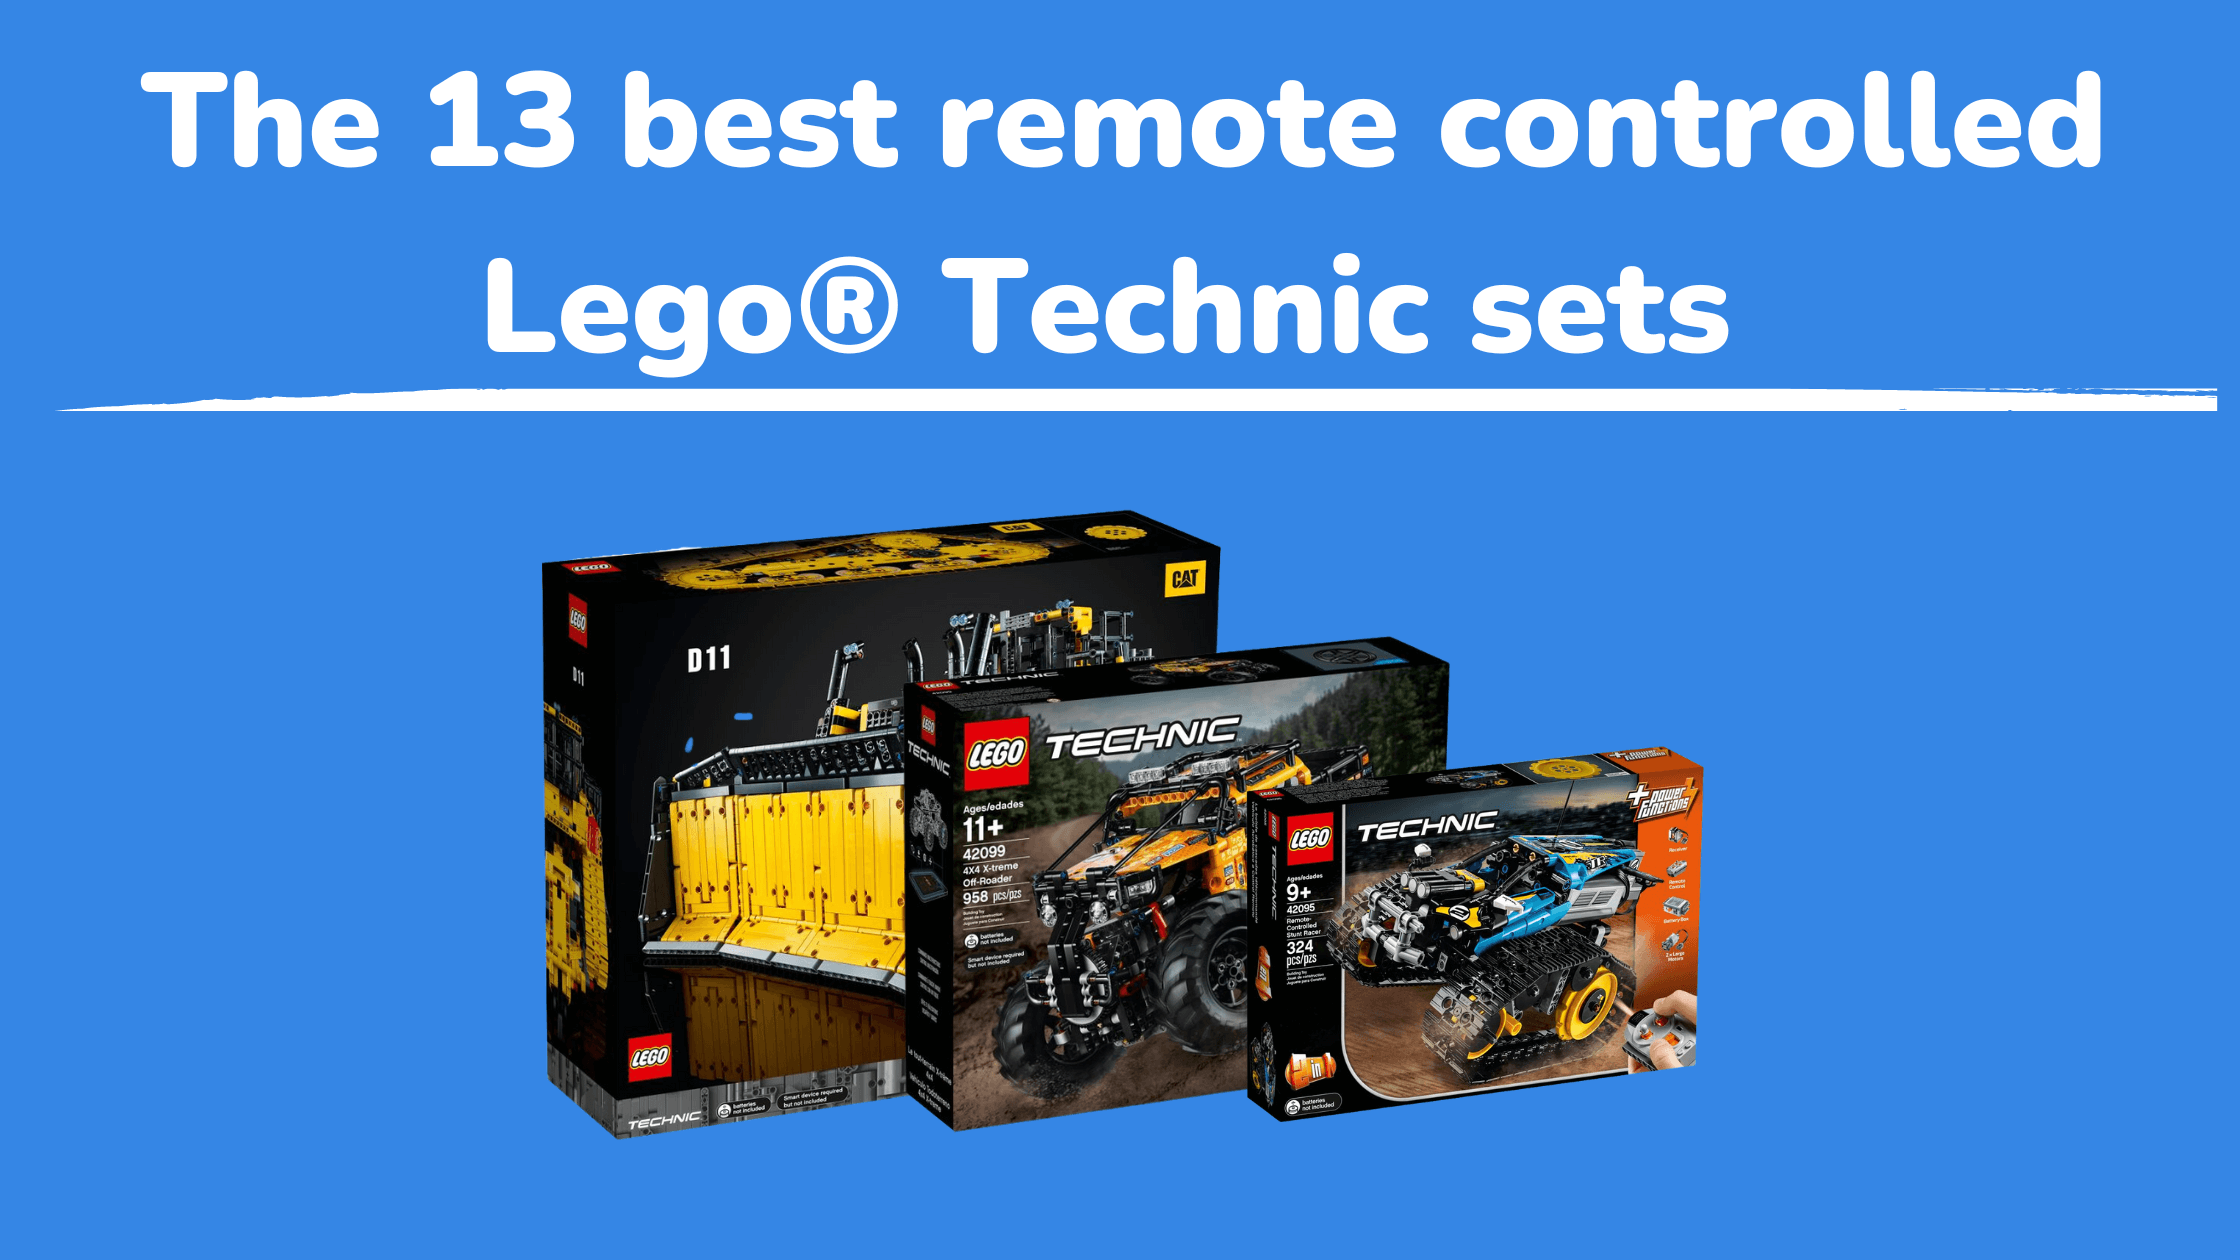 The 13 best remote controlled LegoÂ® Technic sets